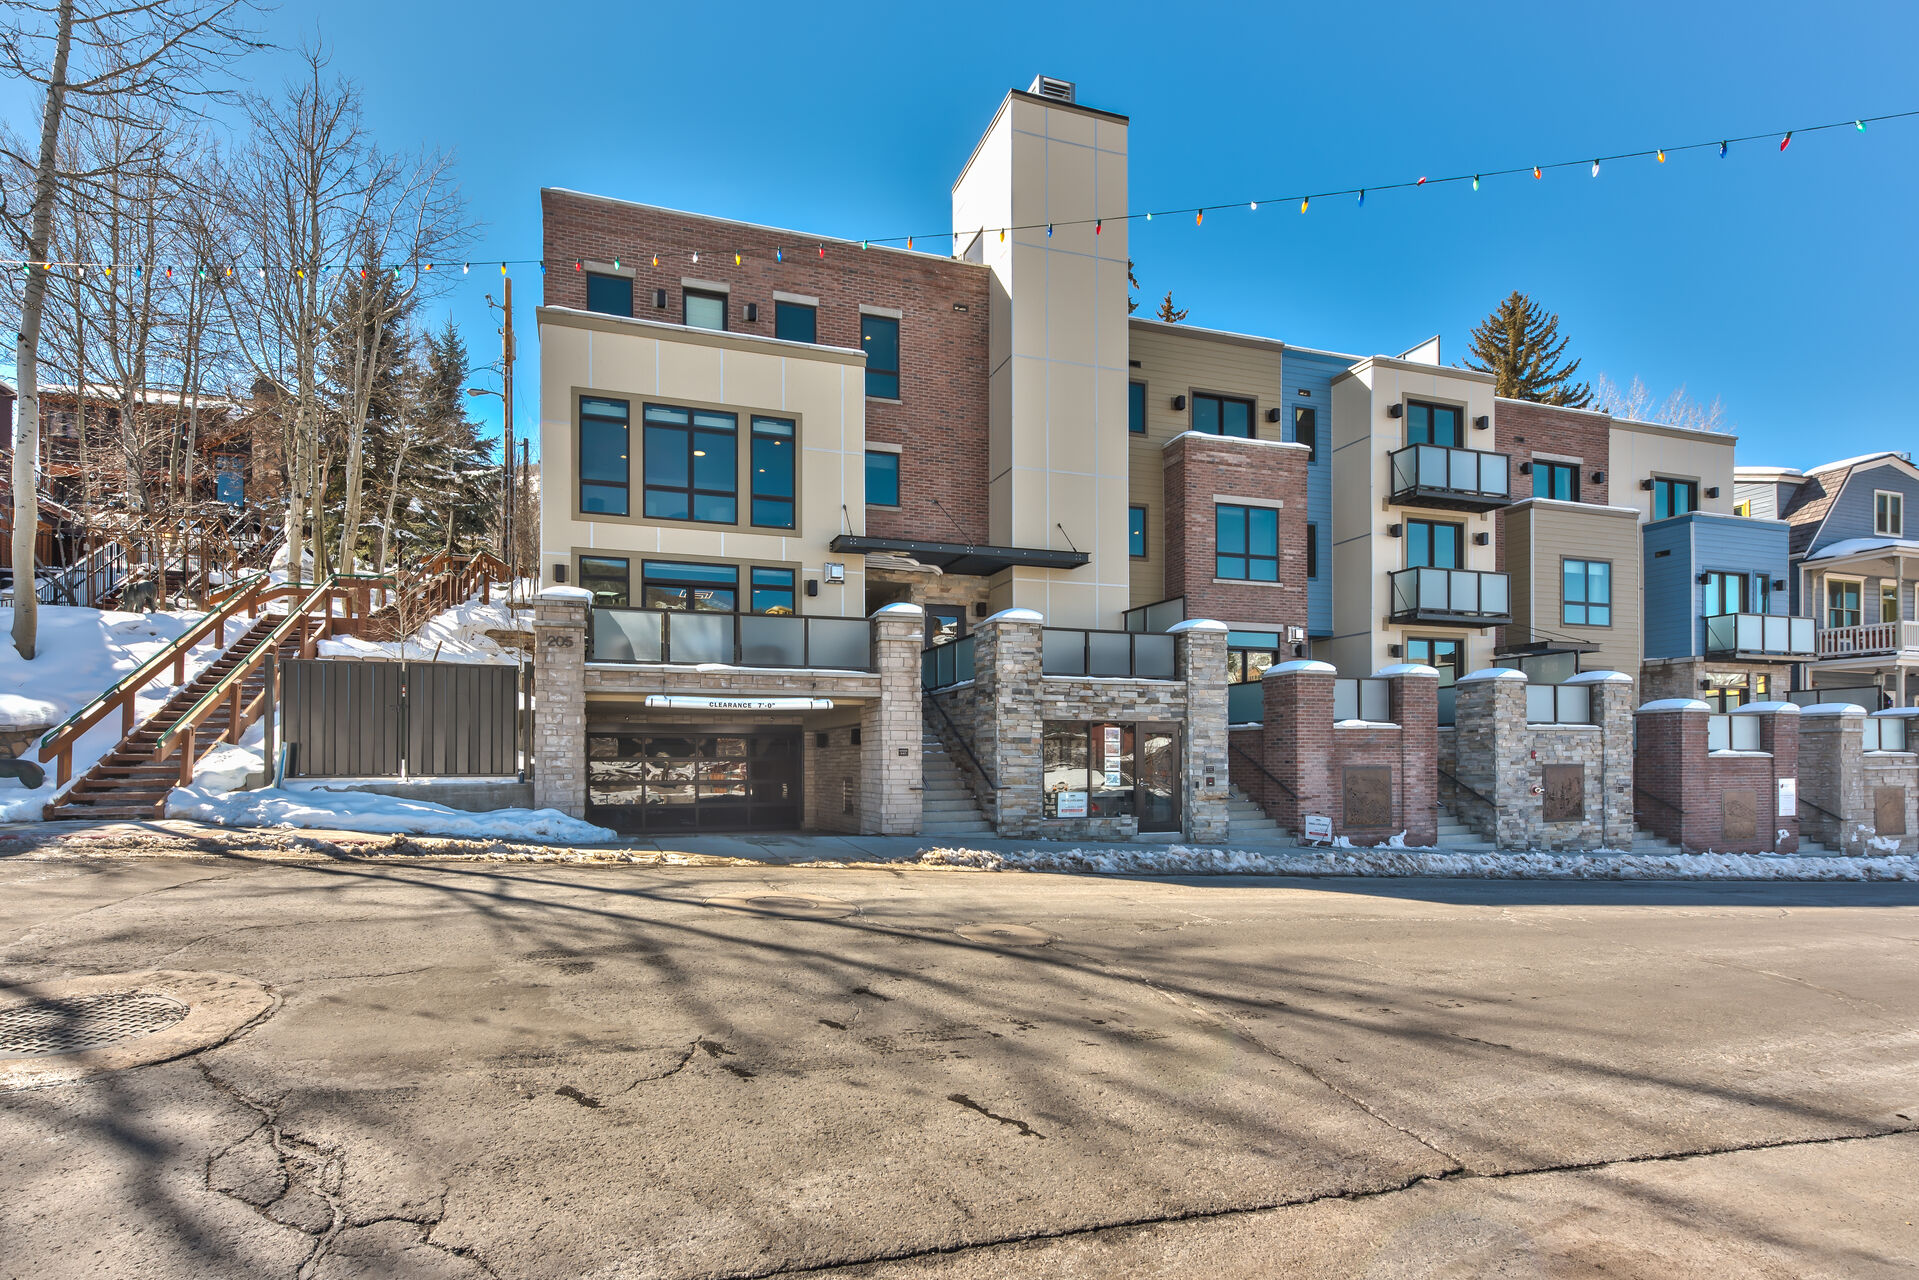 Park City Brownstone on Main - New Luxury Condo with Garage Parking